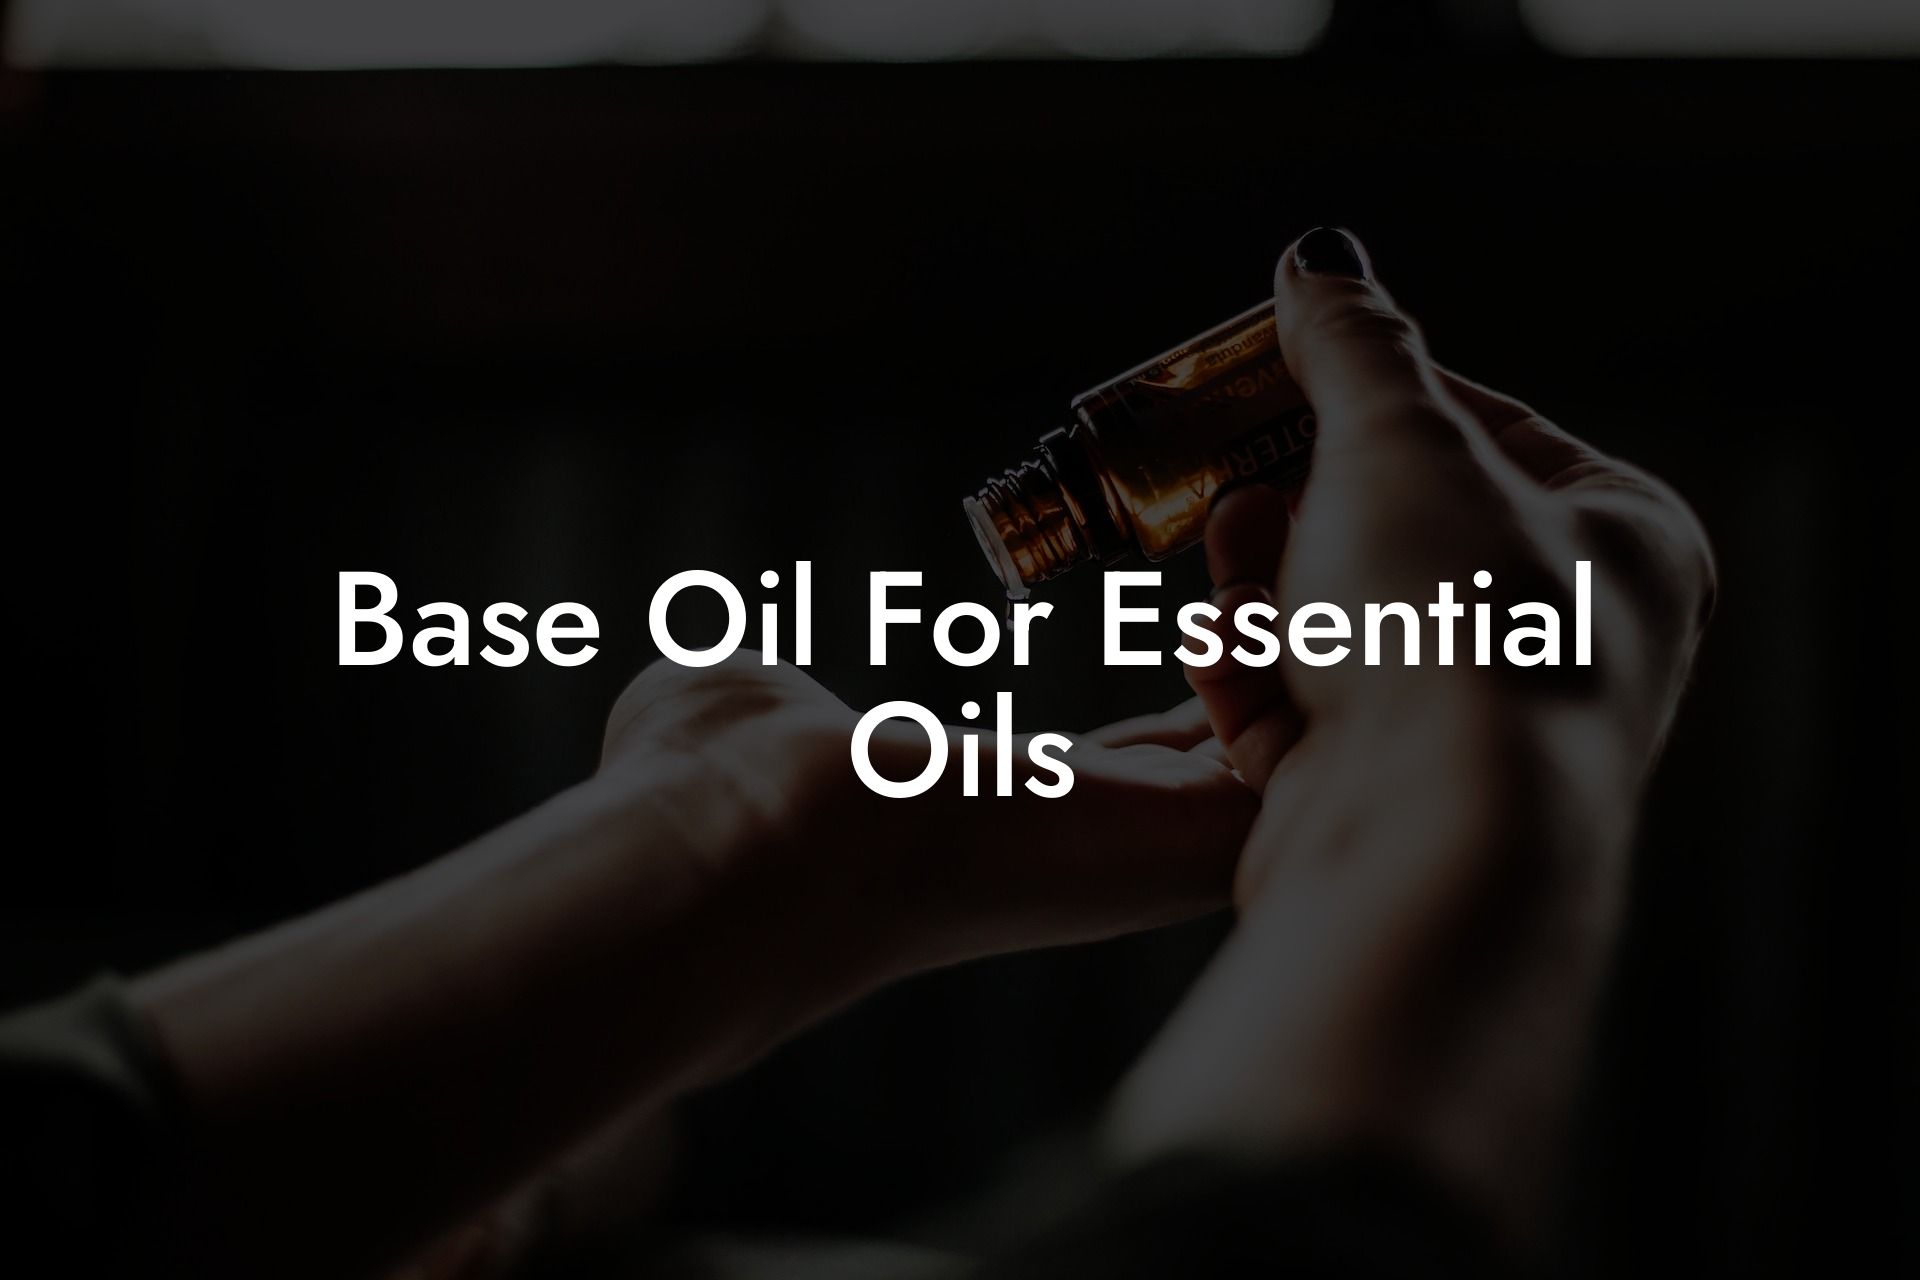 Base Oil For Essential Oils